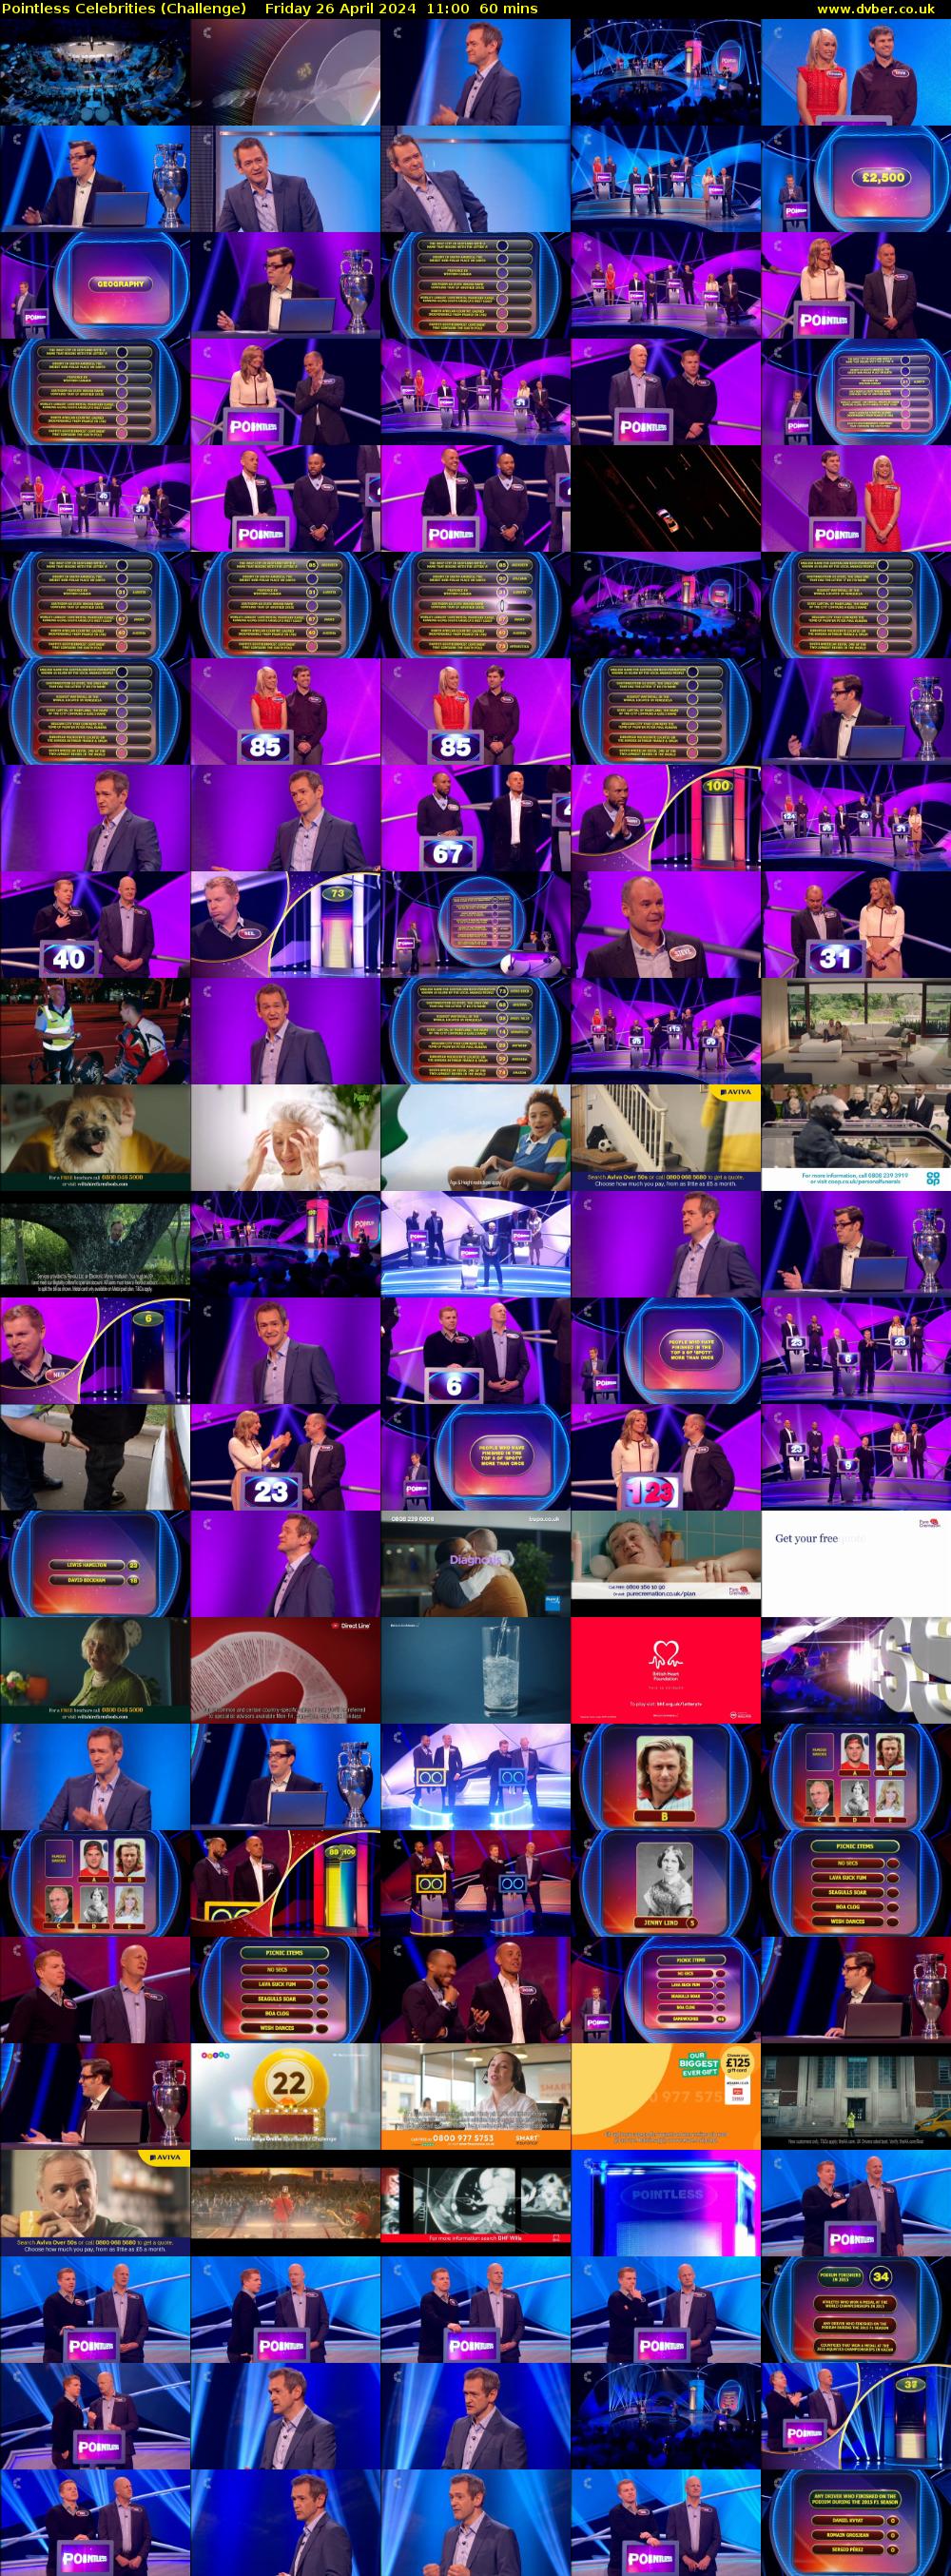 Pointless Celebrities (Challenge) Friday 26 April 2024 11:00 - 12:00